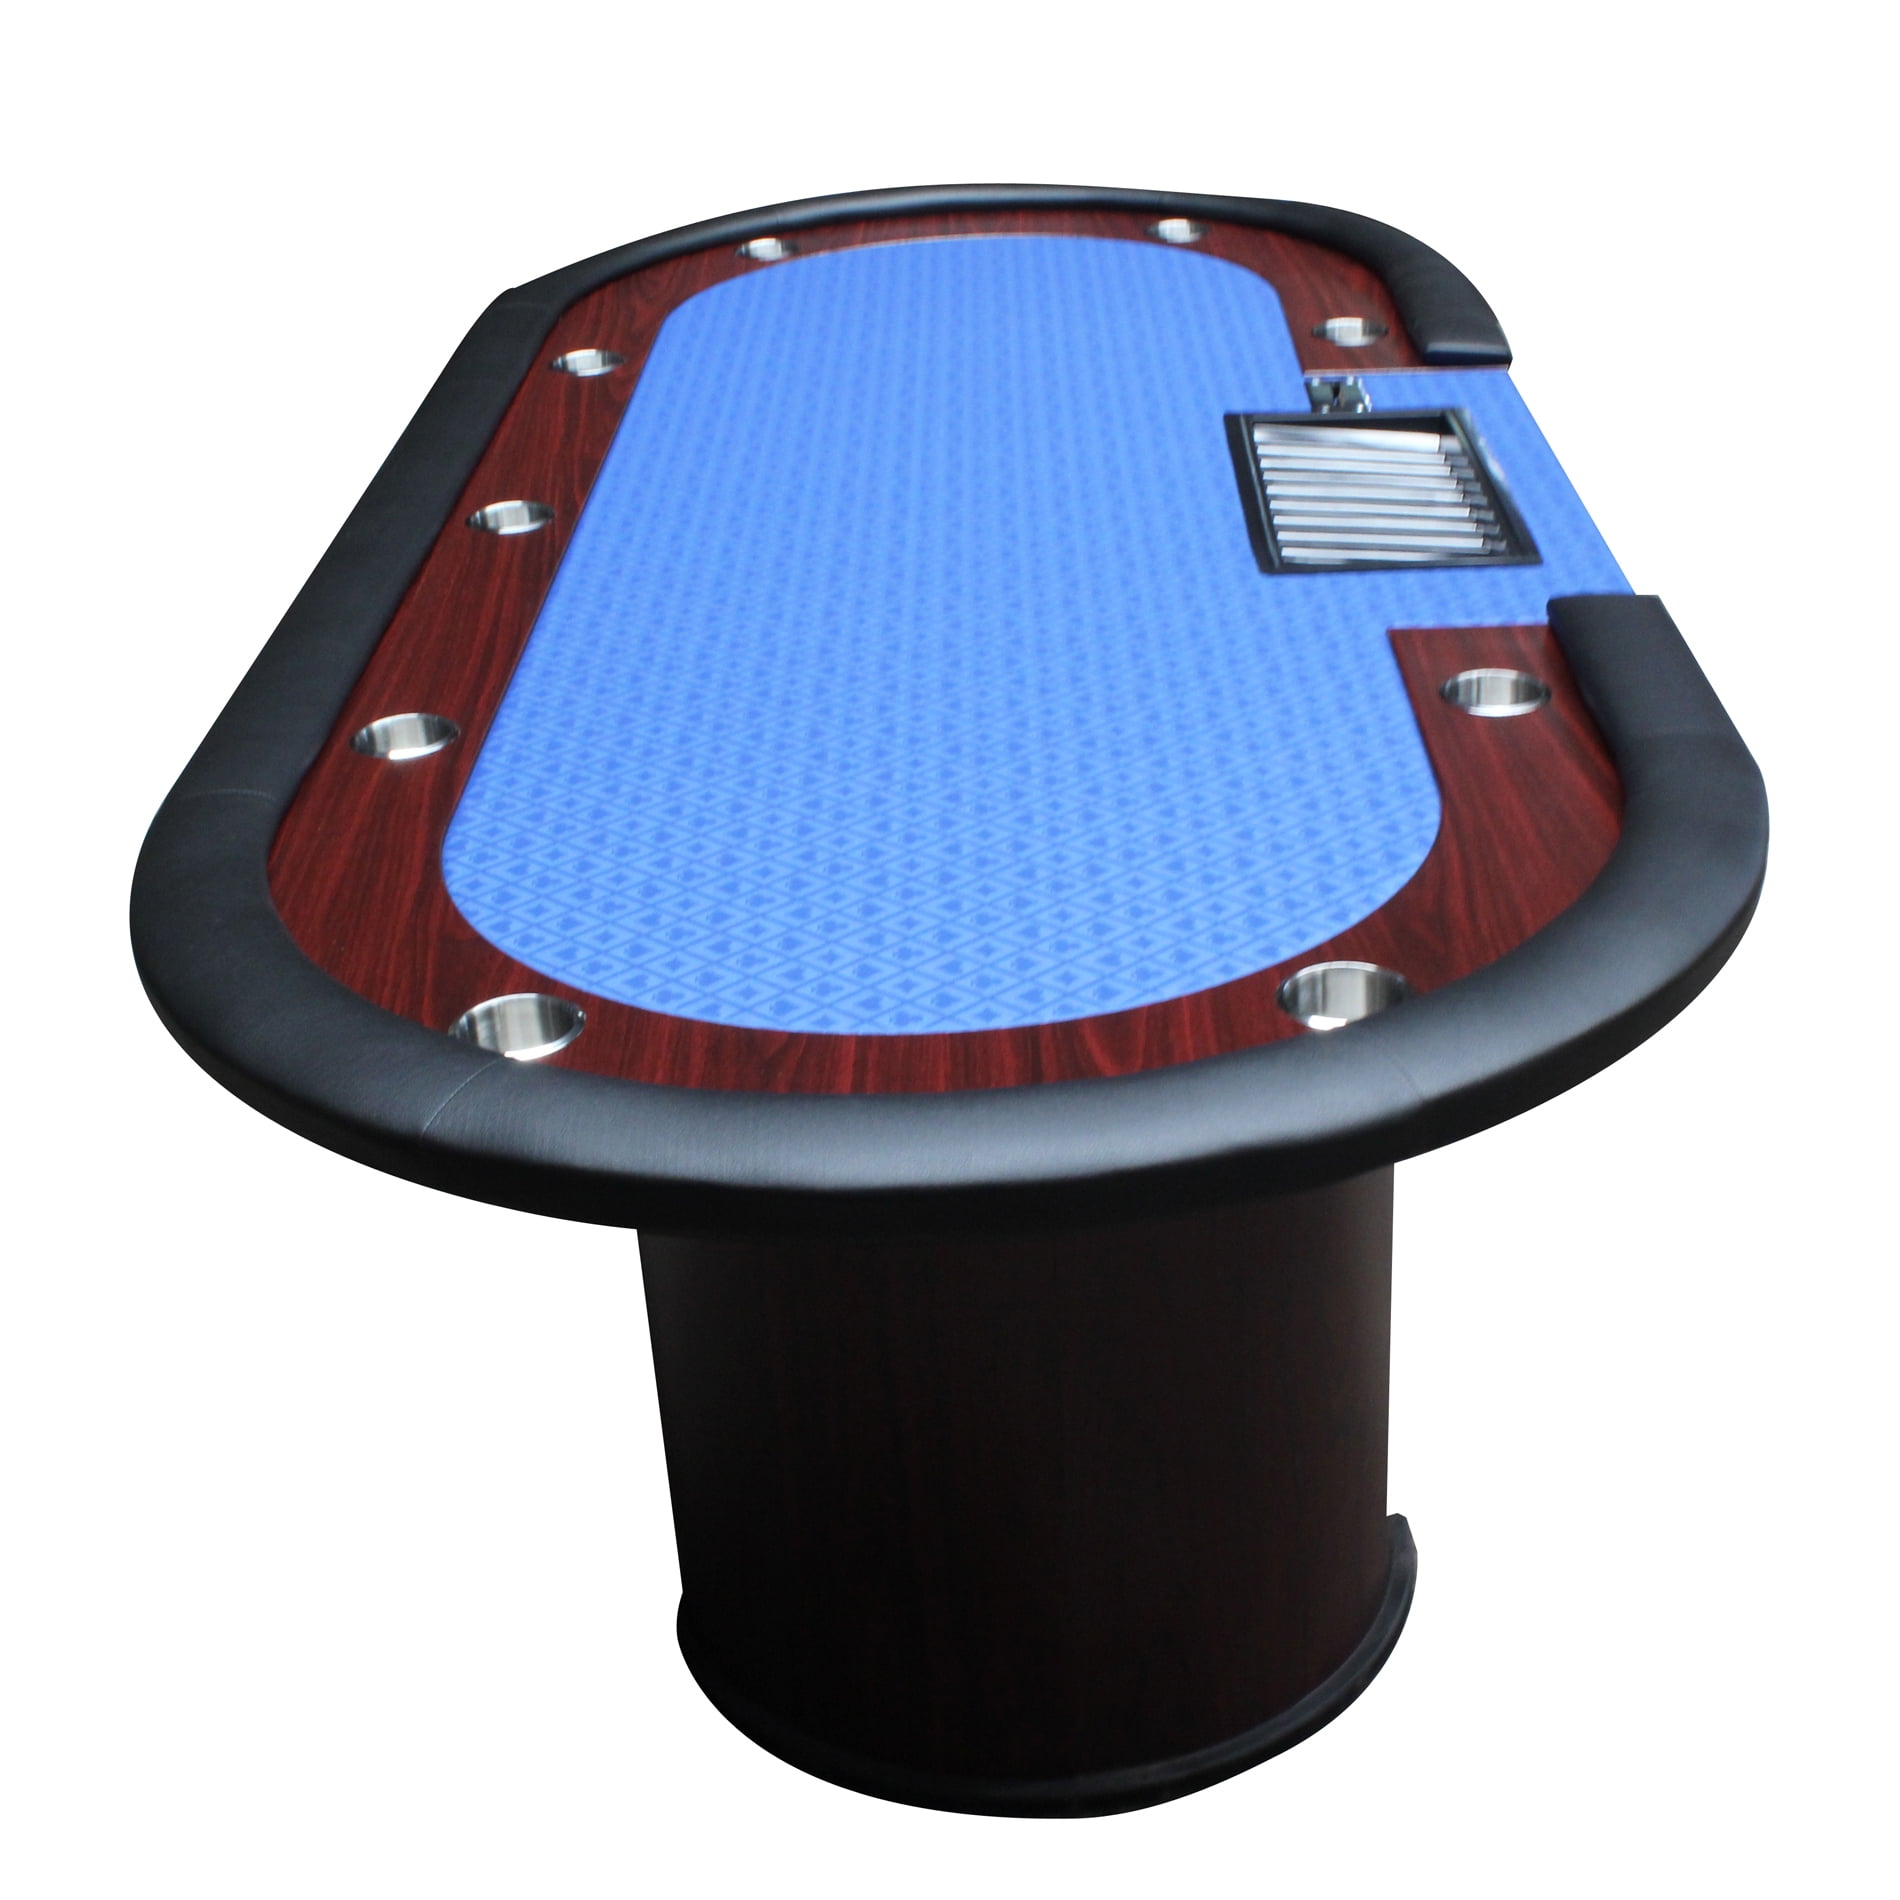 What Are the Best Poker Chips for Your Home Poker Table? – Just Poker Tables